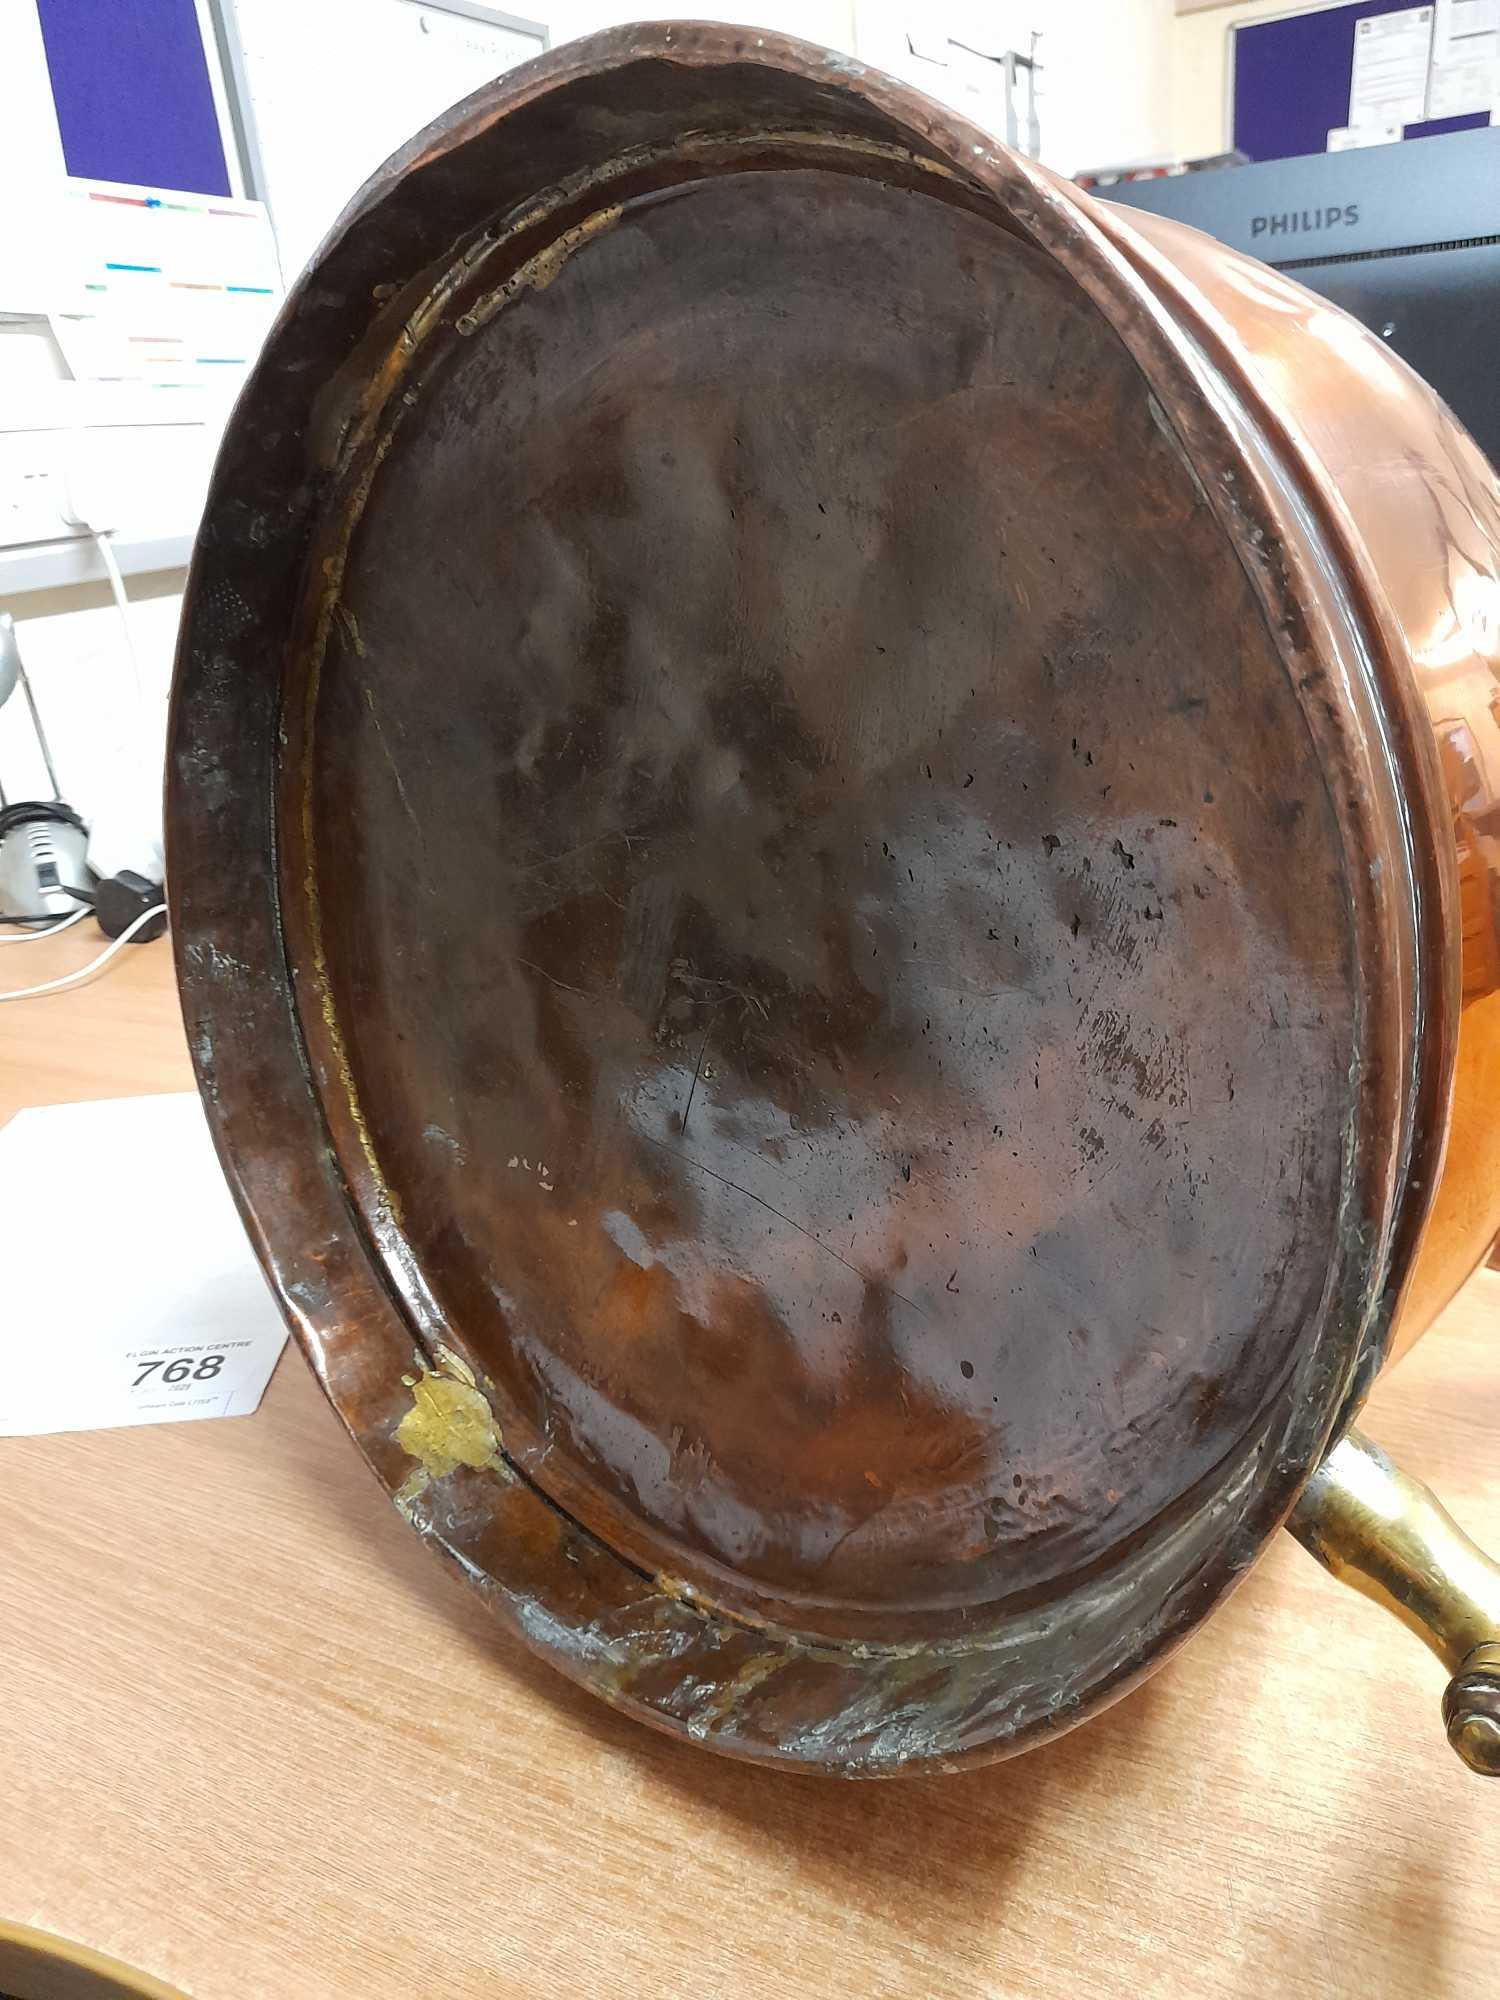 4 GALLON COPPER WHISKY MEASURING JUG - Image 24 of 24